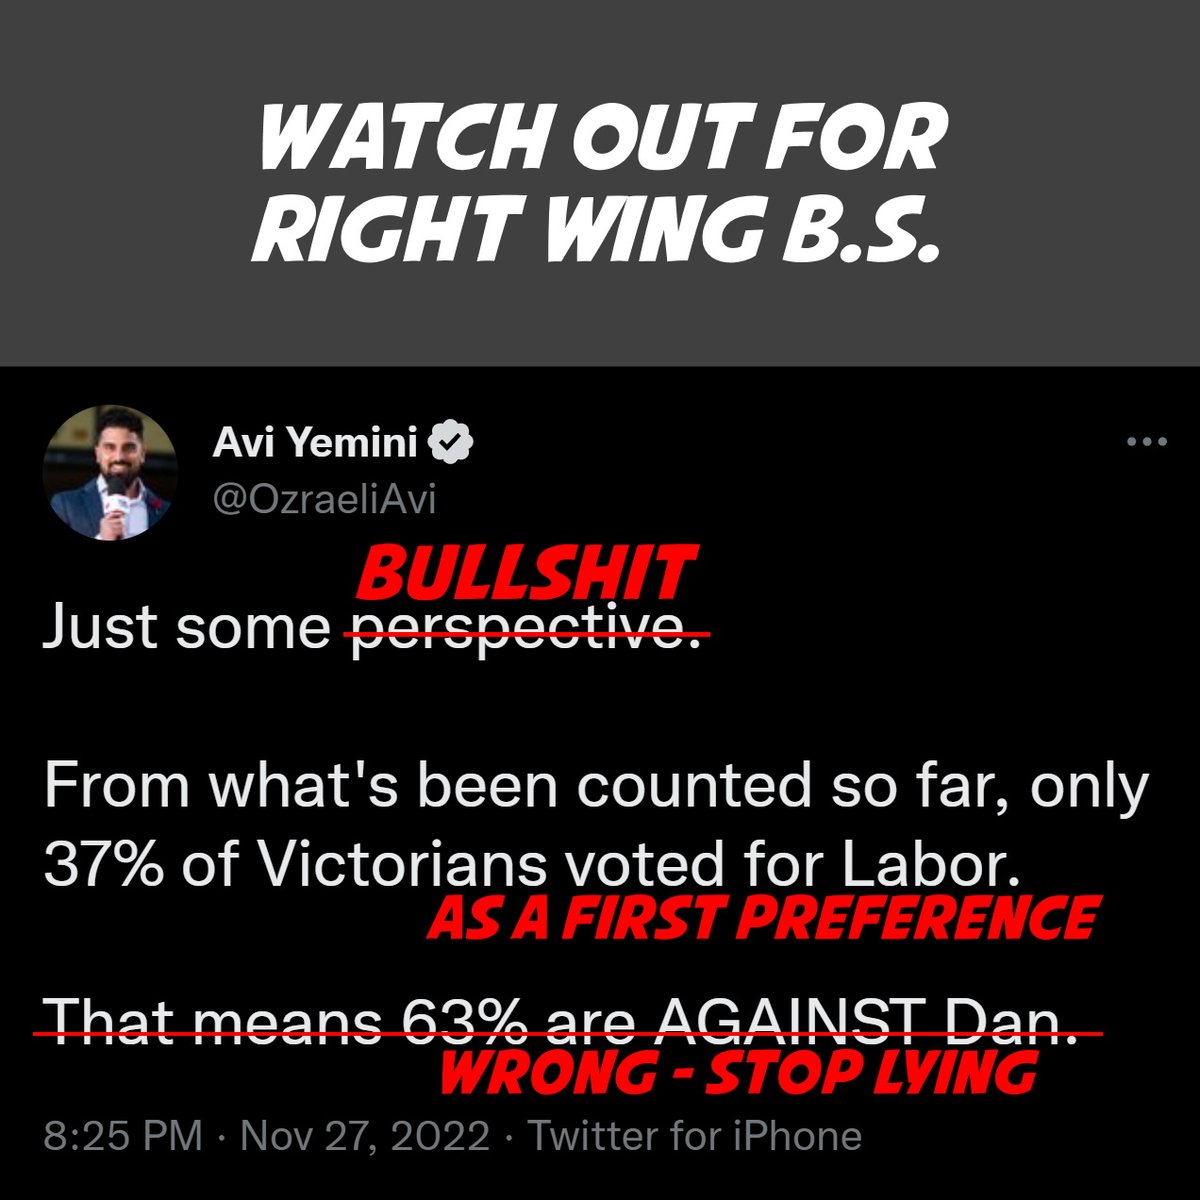 Call out #RightWingBS 
Australia has #PreferentialVoting